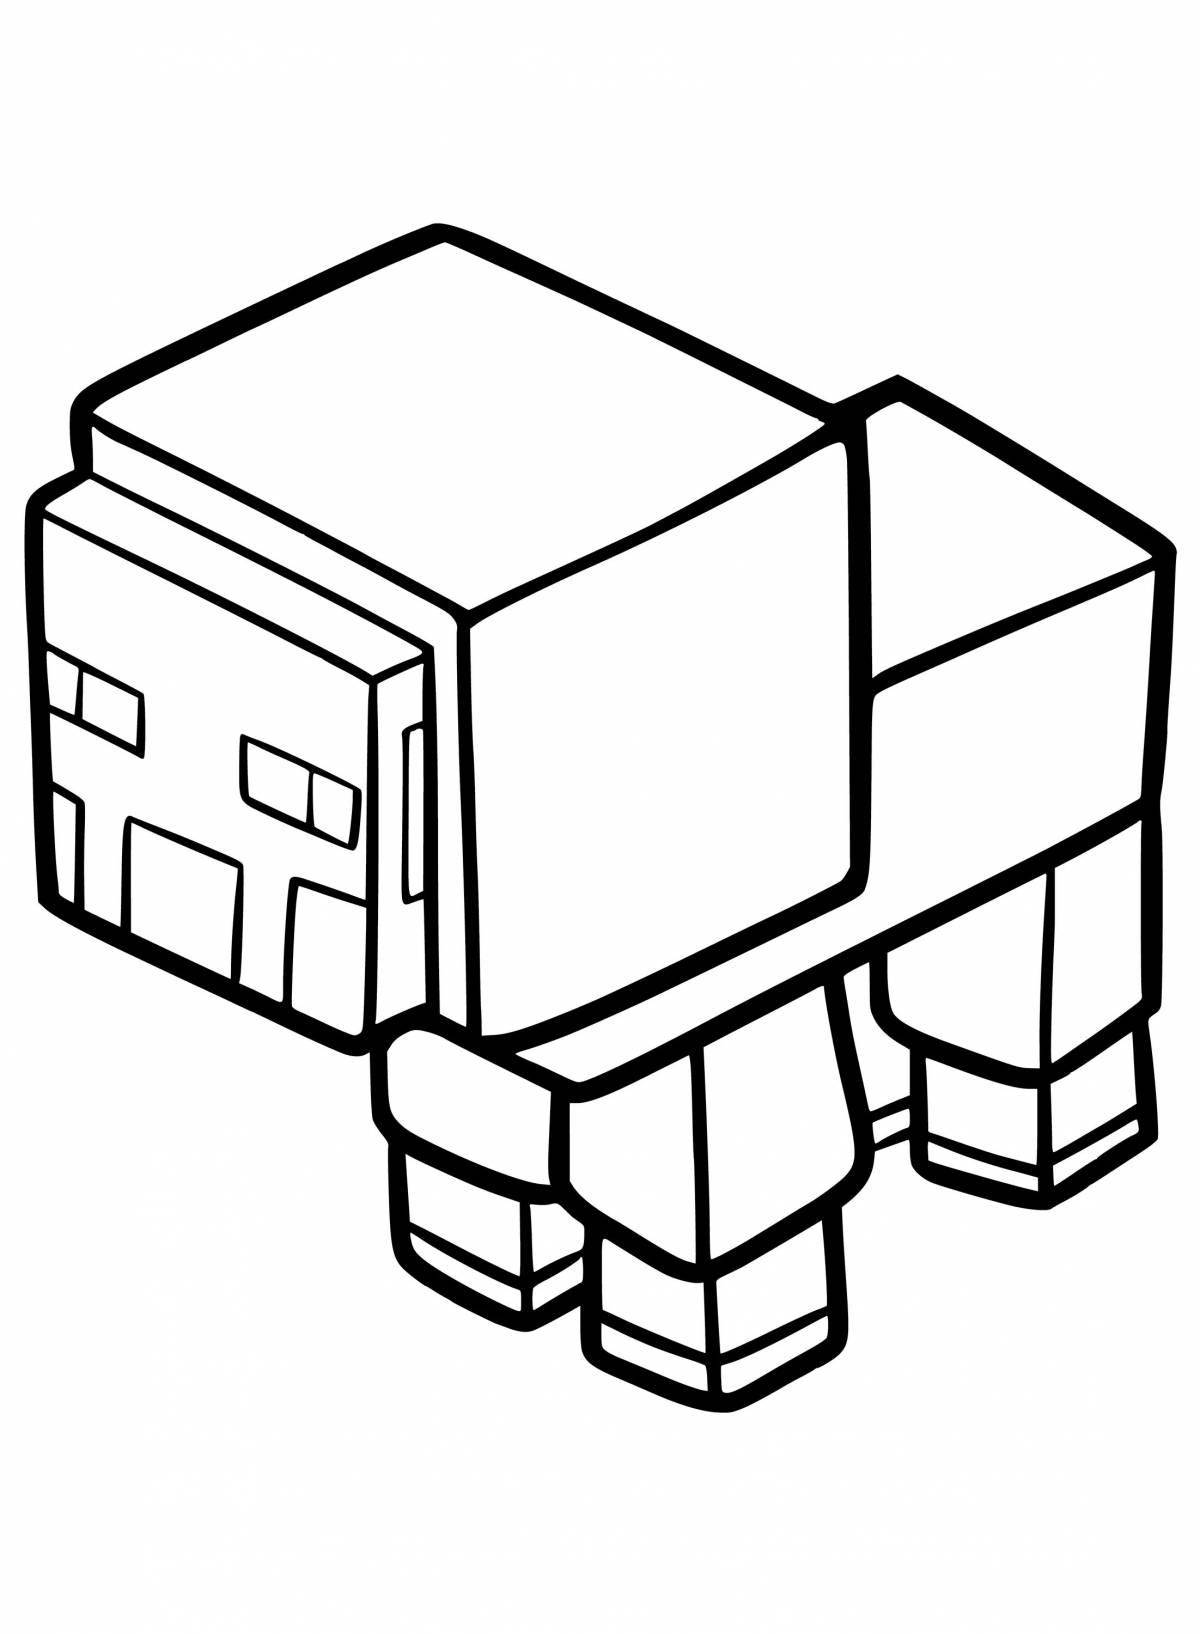 Exciting minecraft pig coloring page